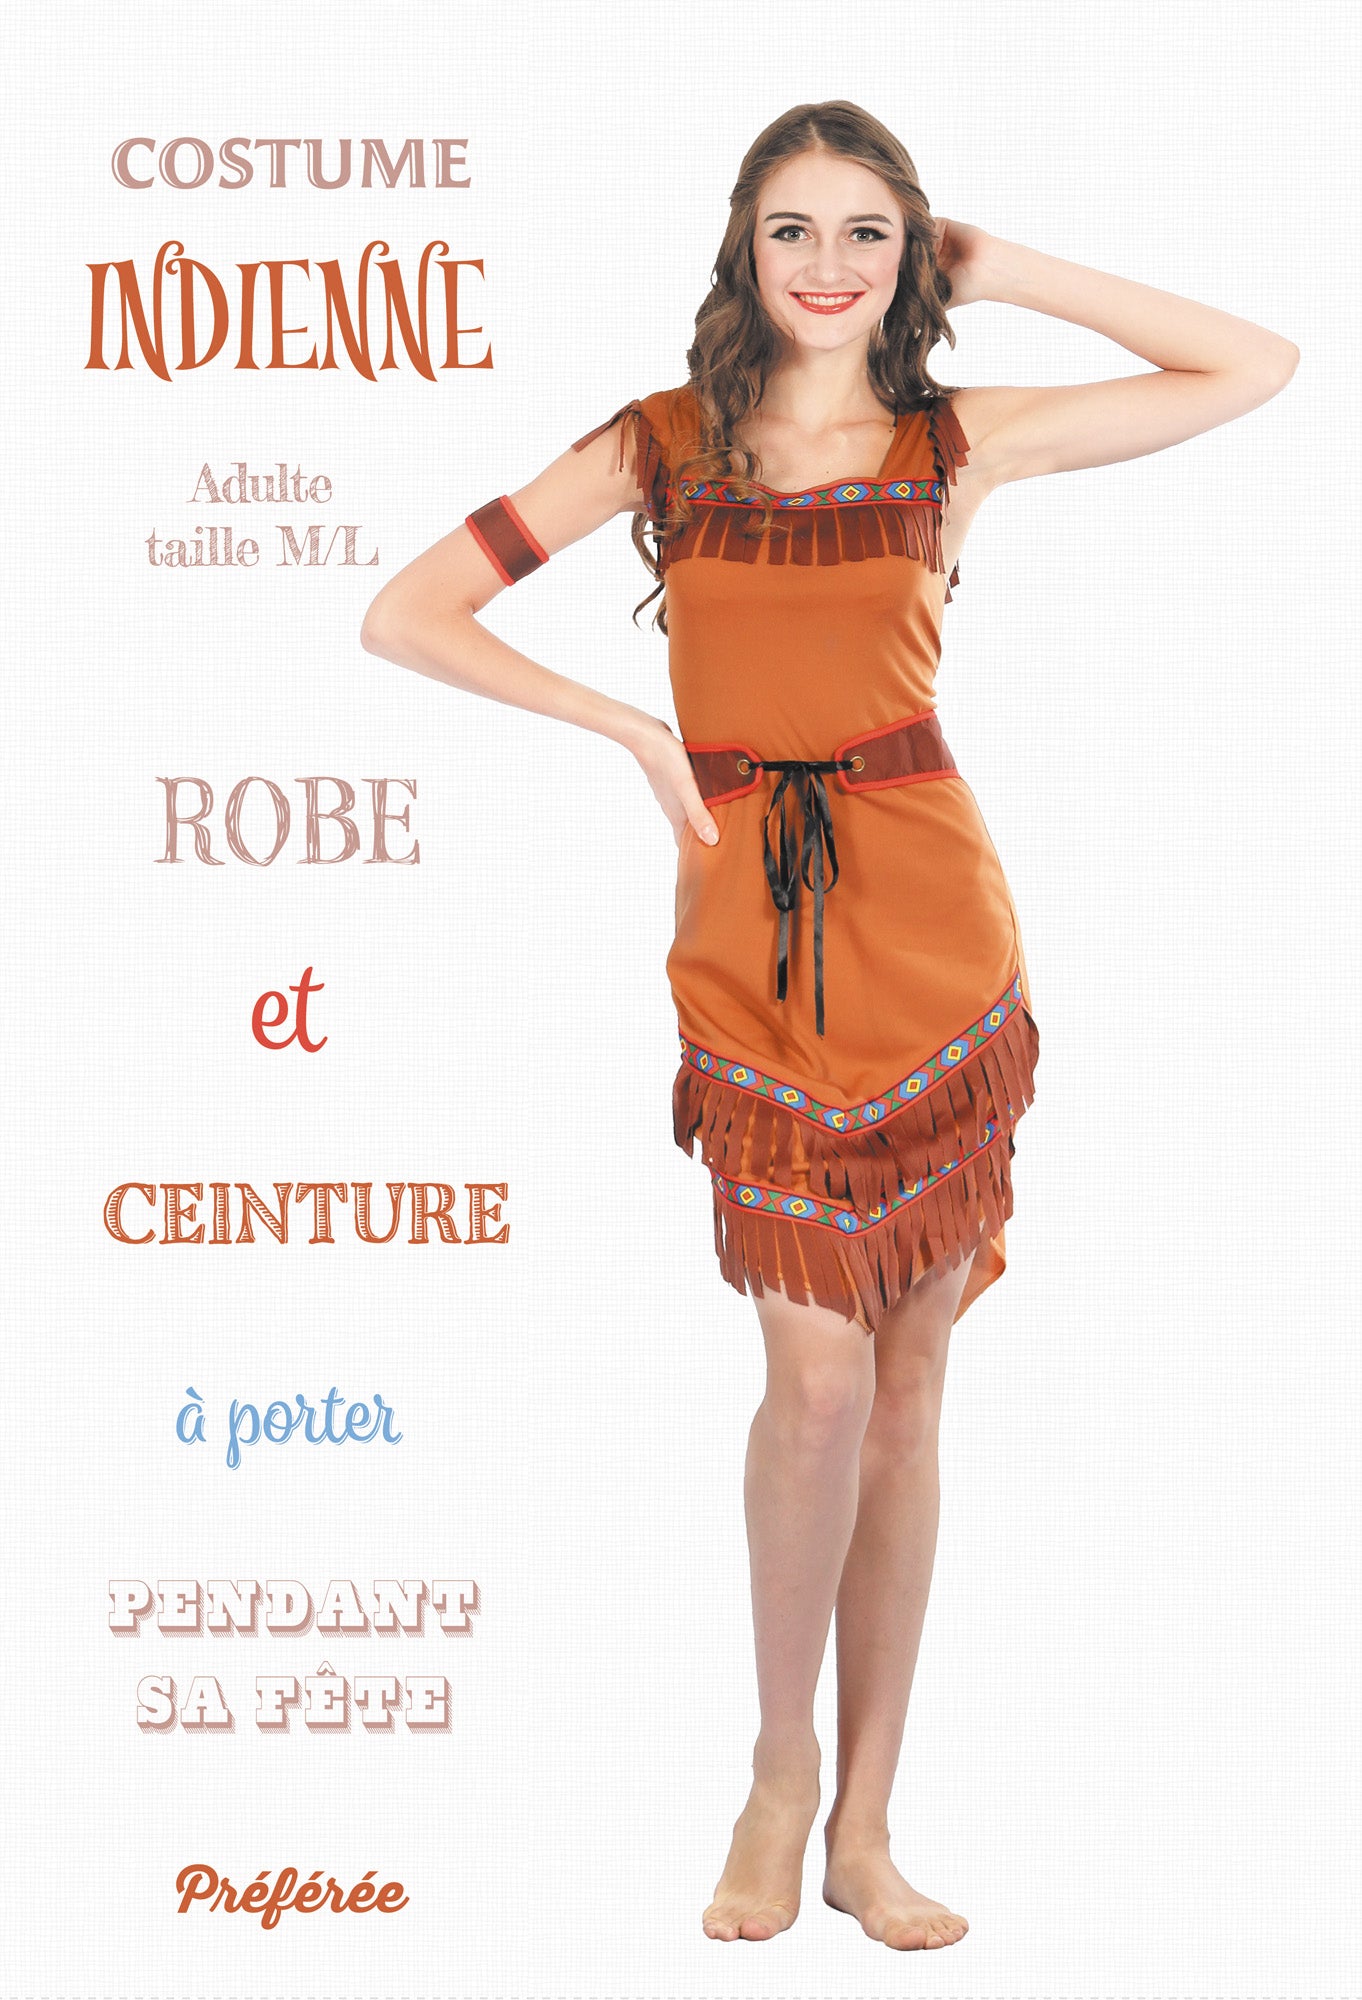 COSTUME INDIENNE